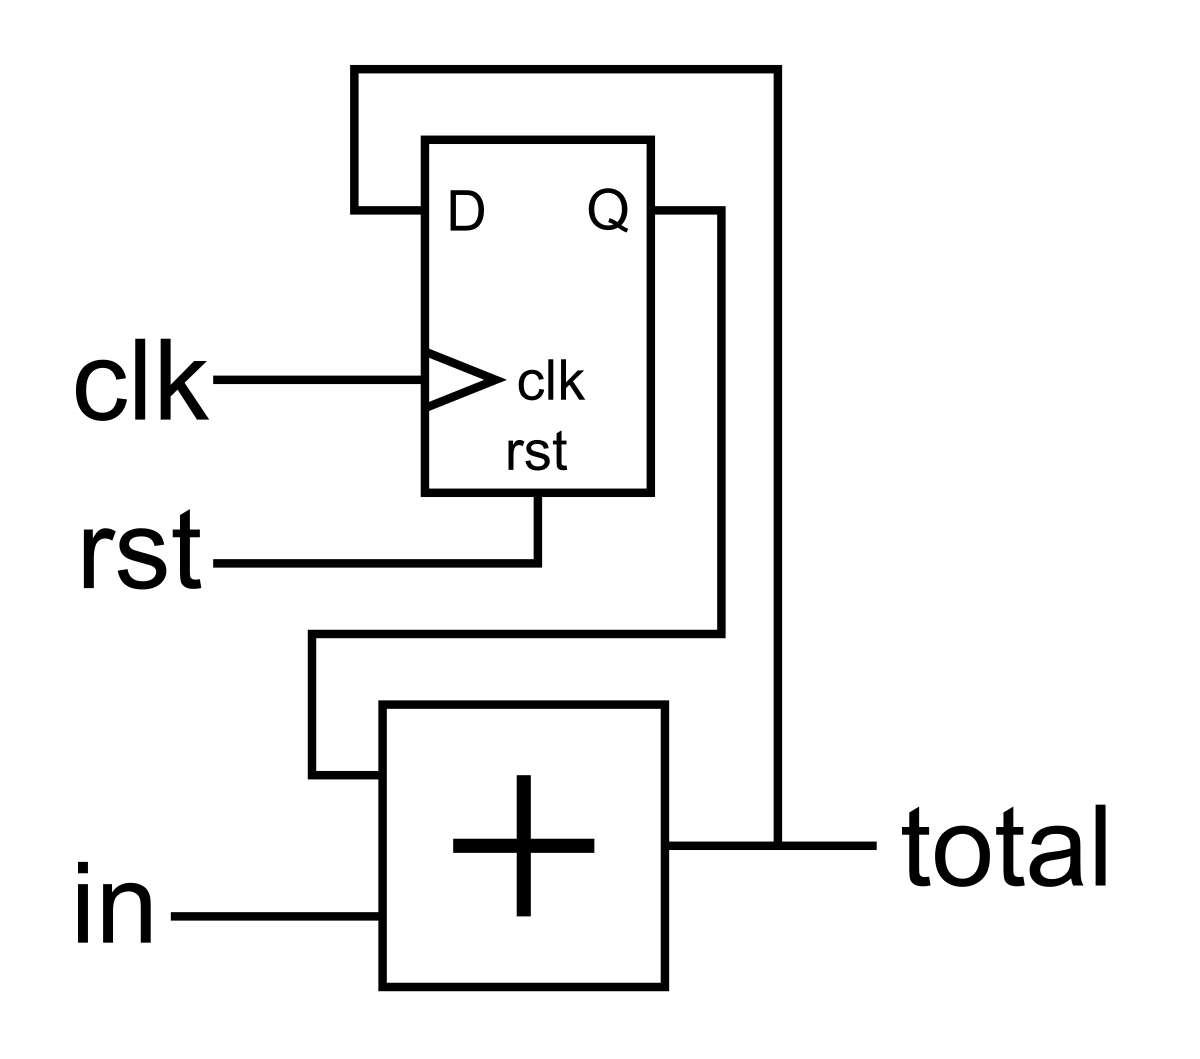 Addition Loop with DFF